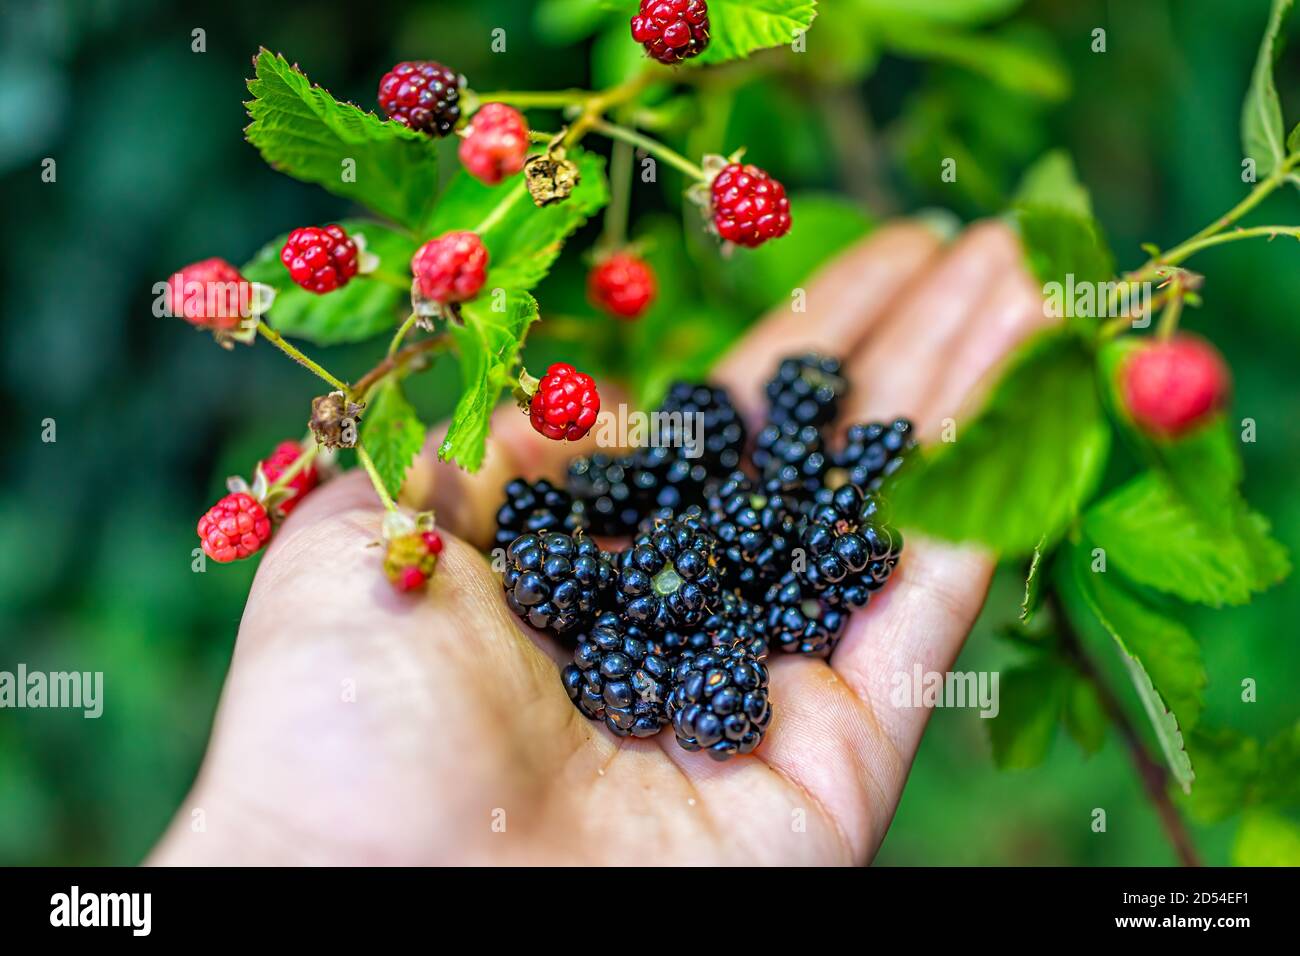 Hanging many black and red ripe blackberries ripening on plant bush garden farm with man hand picking holding fruit Stock Photo